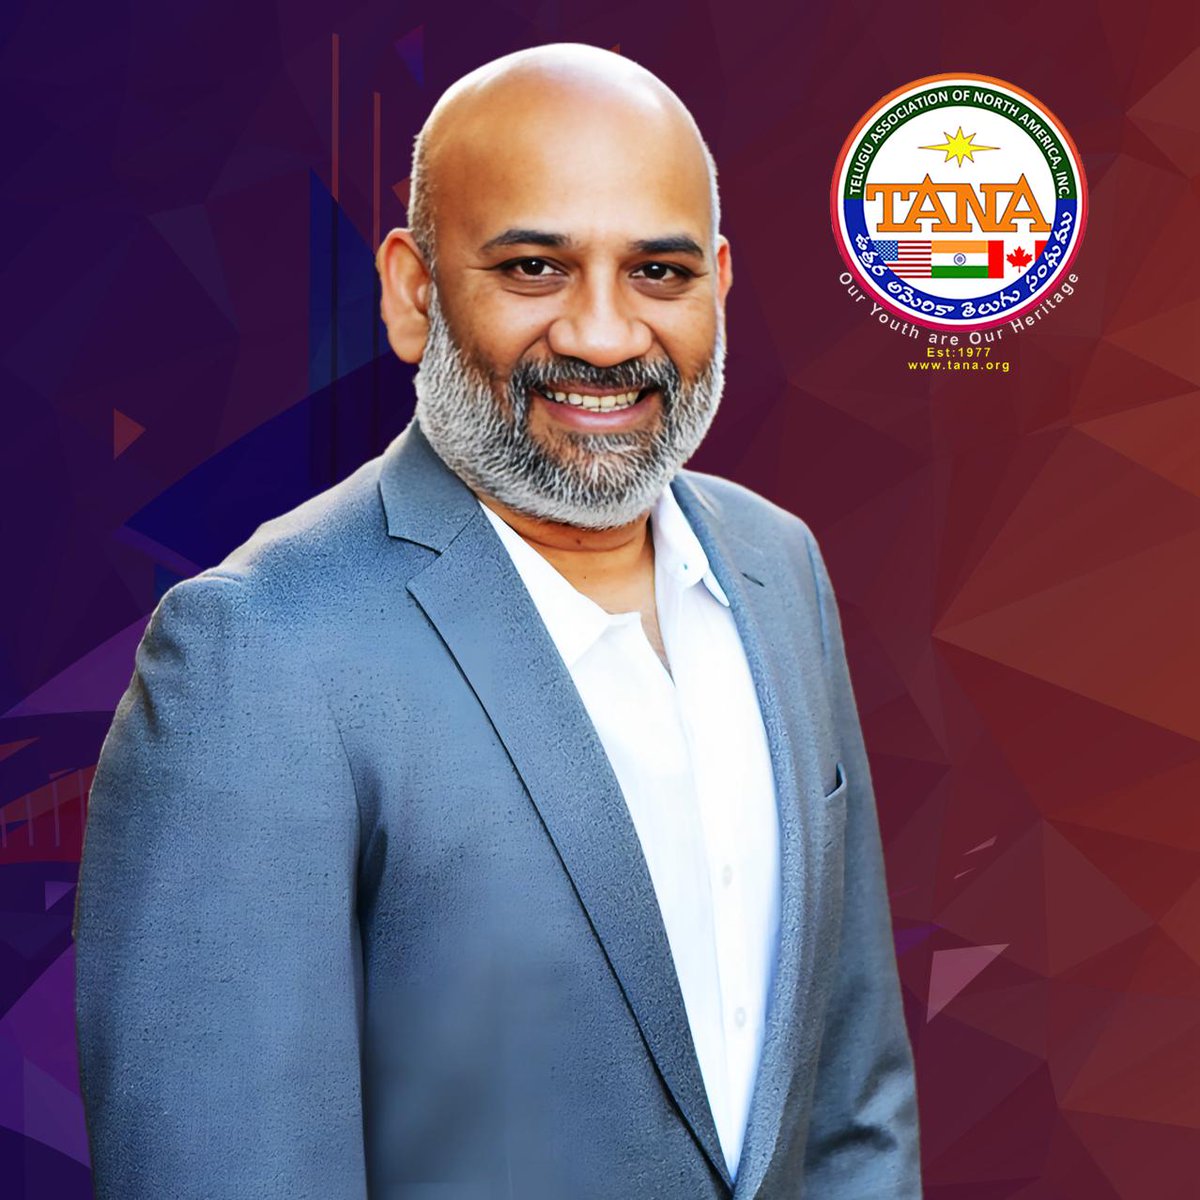 Hearty Congratulations to Dr. Naren Kodali Garu for being elected as the Executive Vice-President of TANA (Telugu Association of North America). I wish him all the very best in this journey.